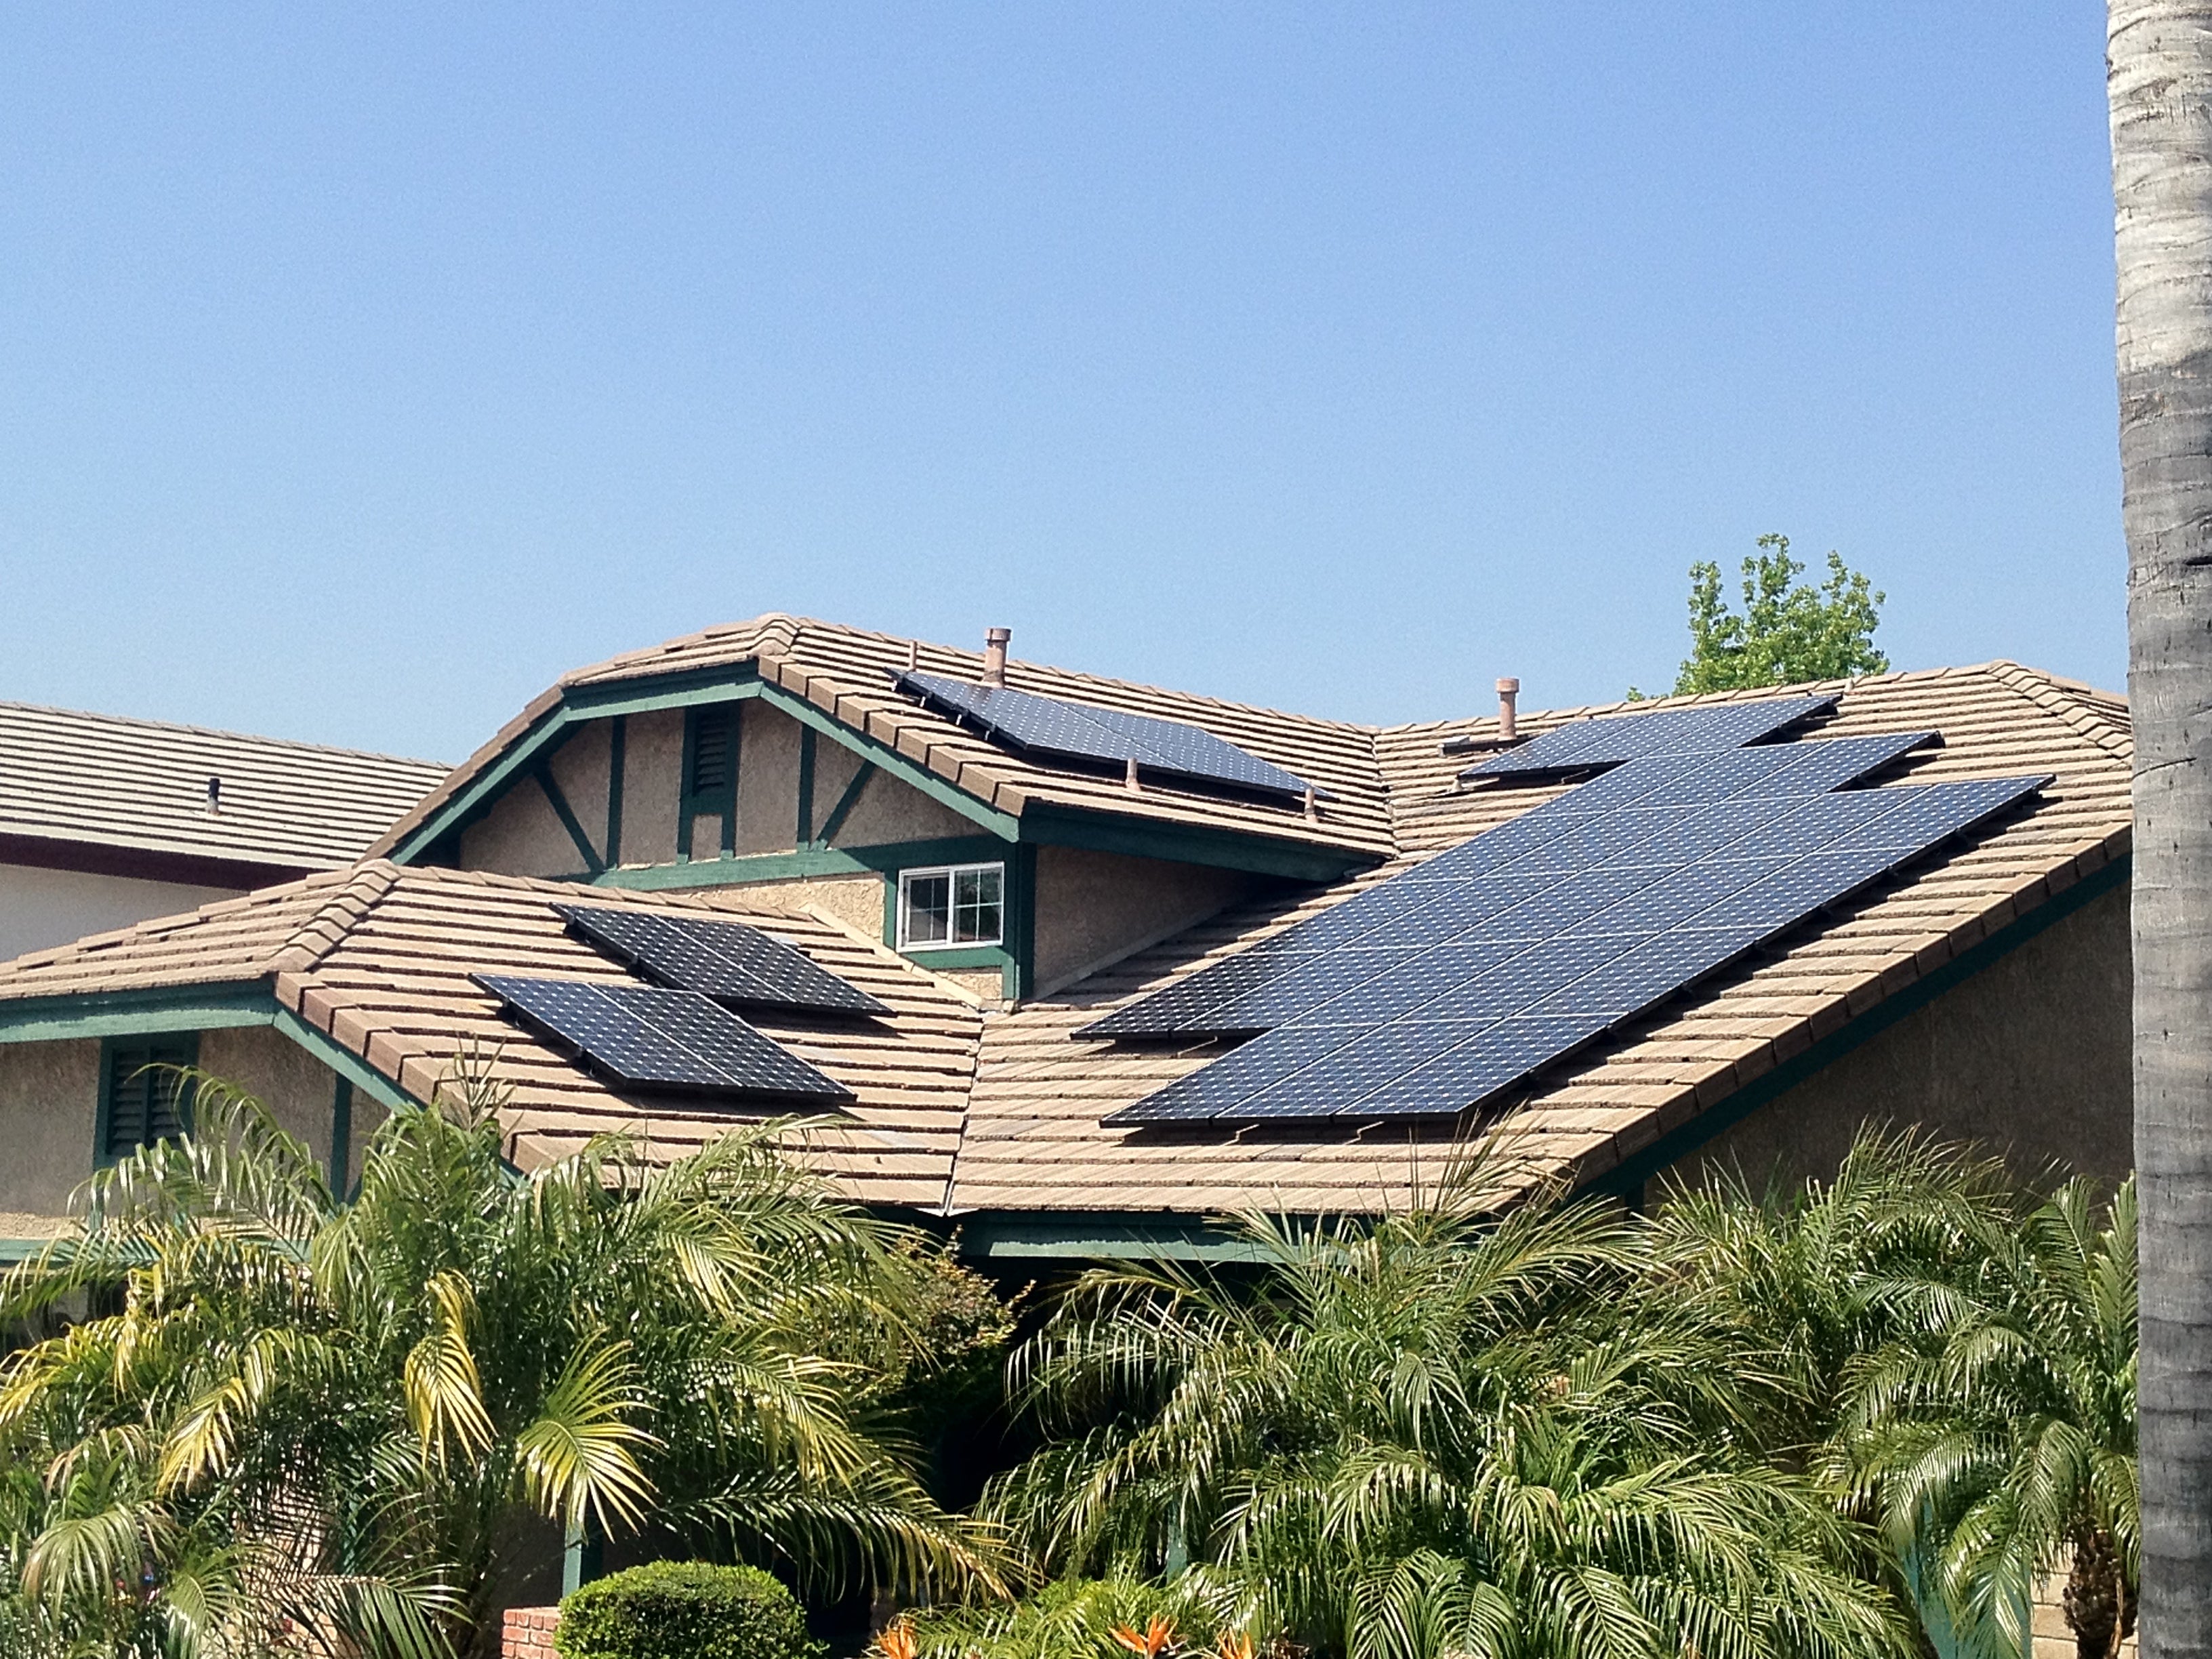 Any roof type, any pitch or angle can benefit from solar!